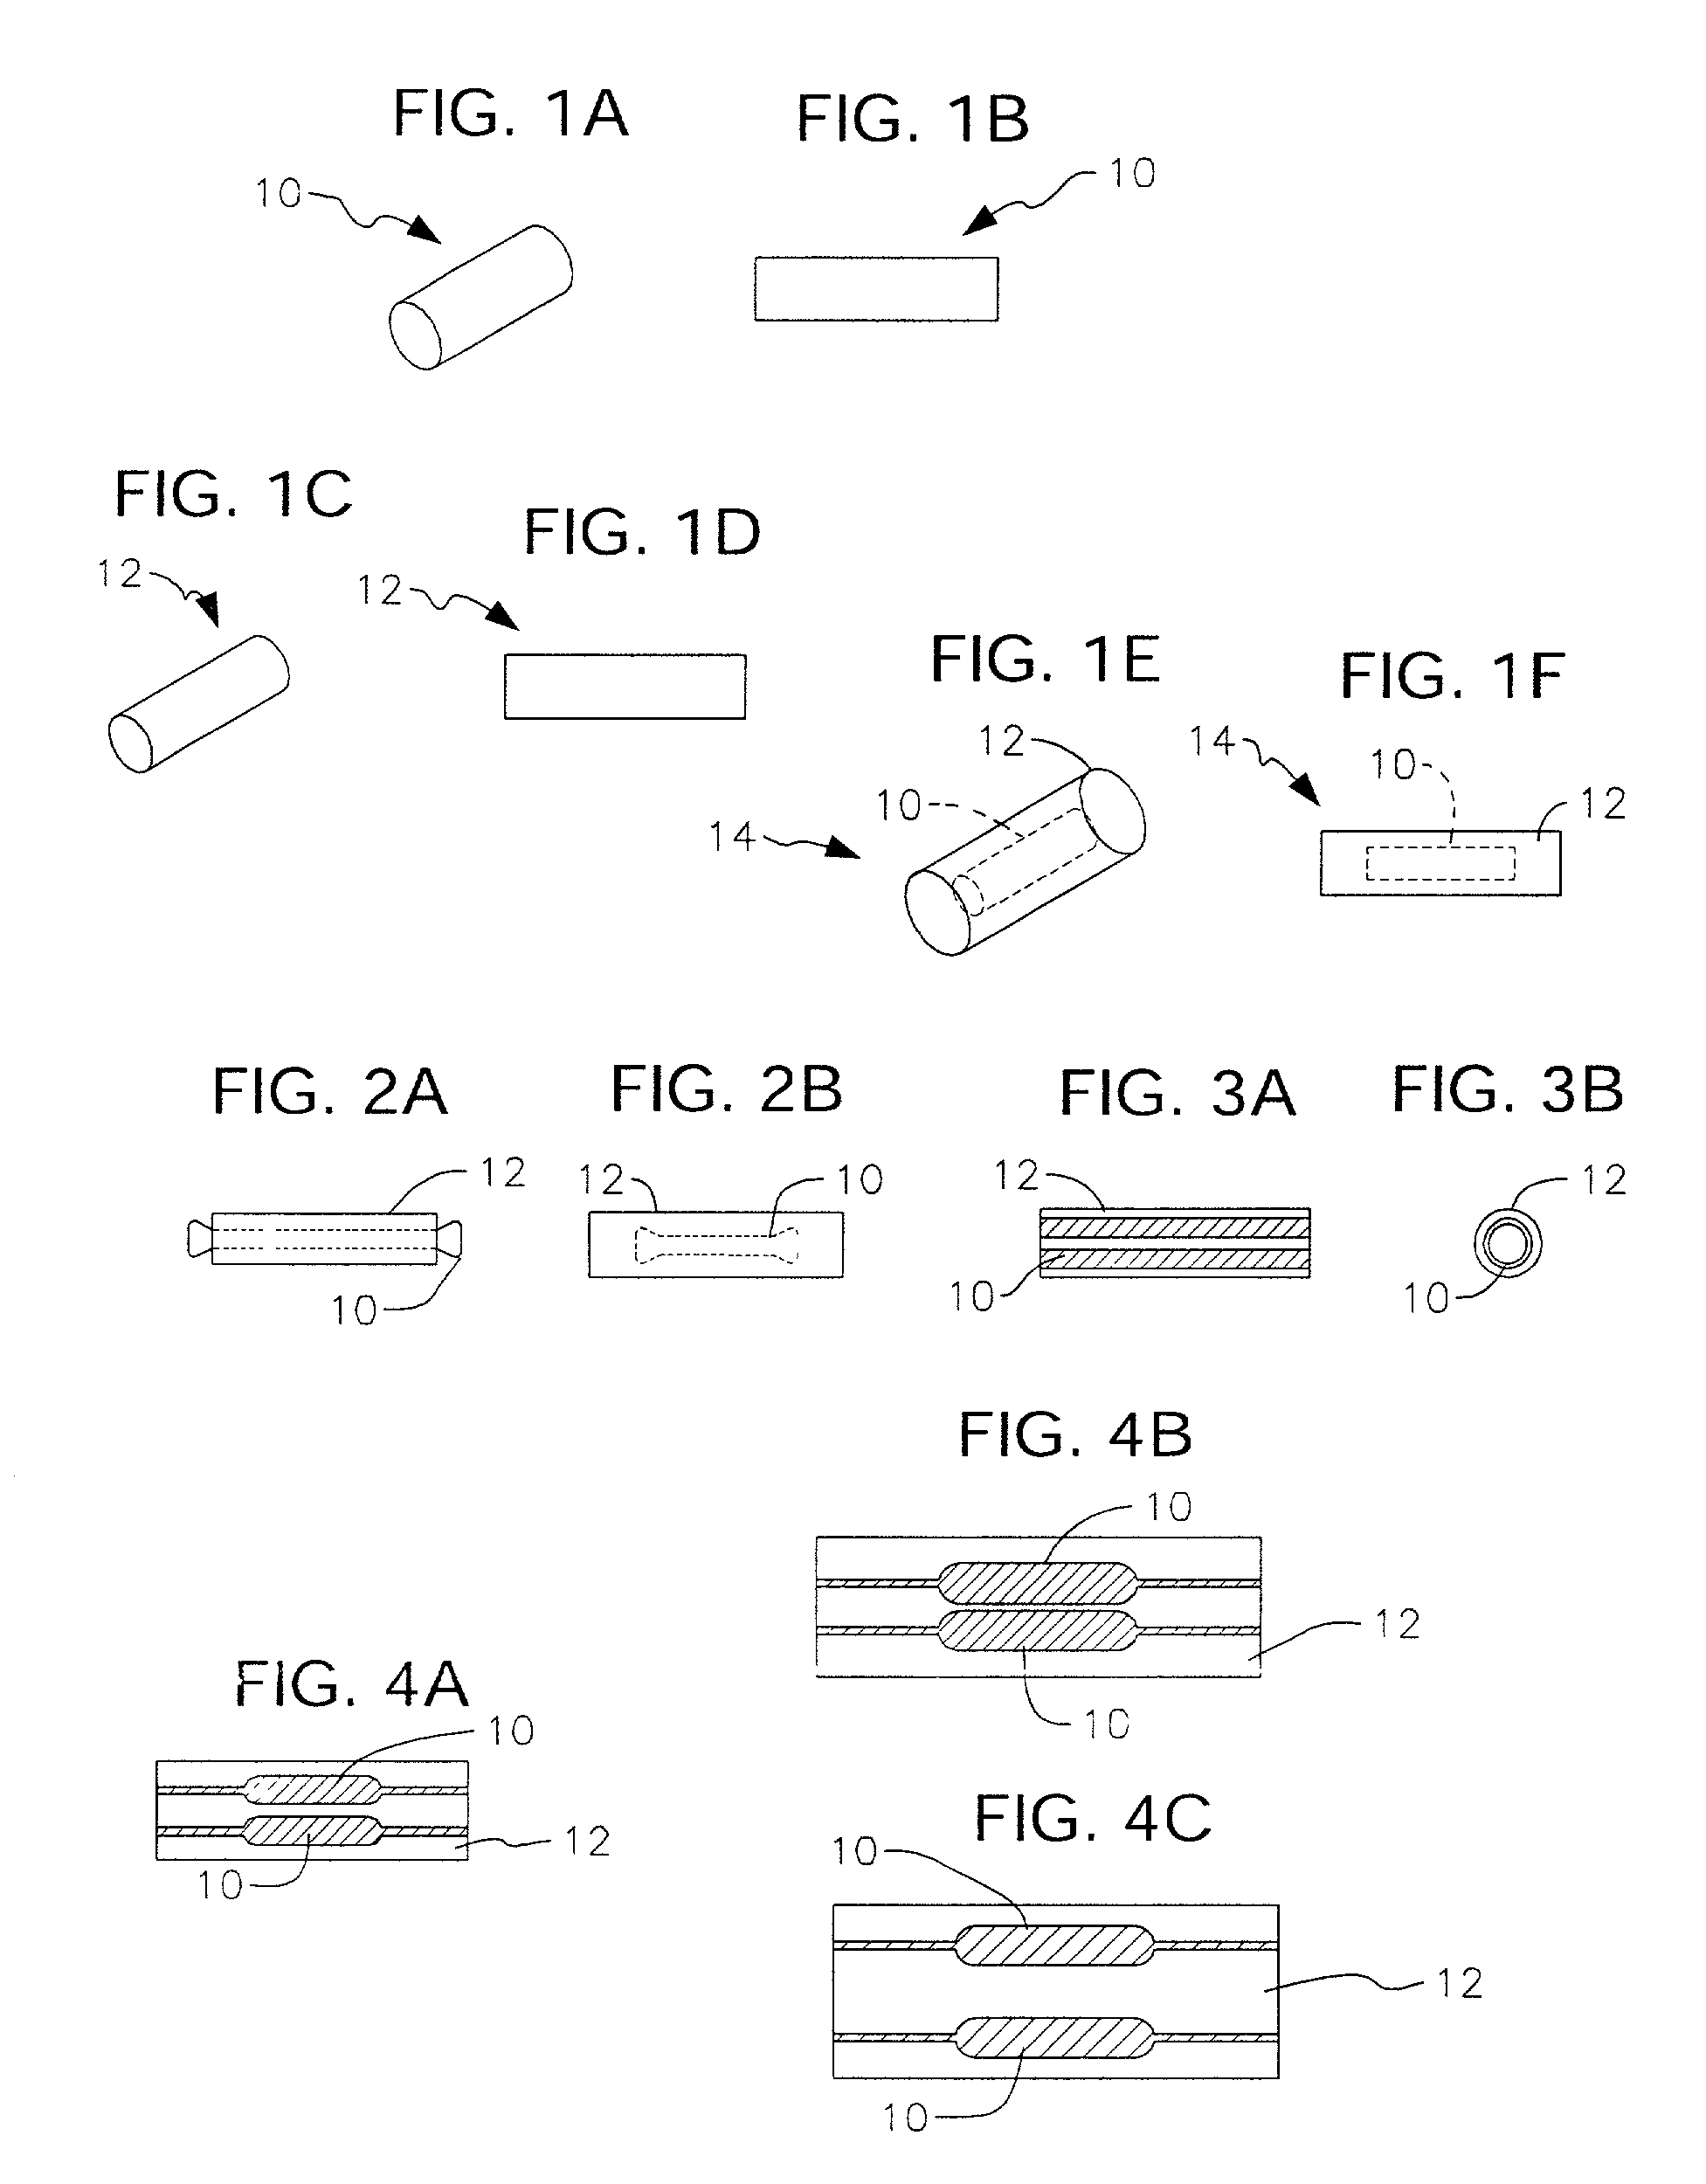 Biodegradable polymer for marking tissue and sealing tracts